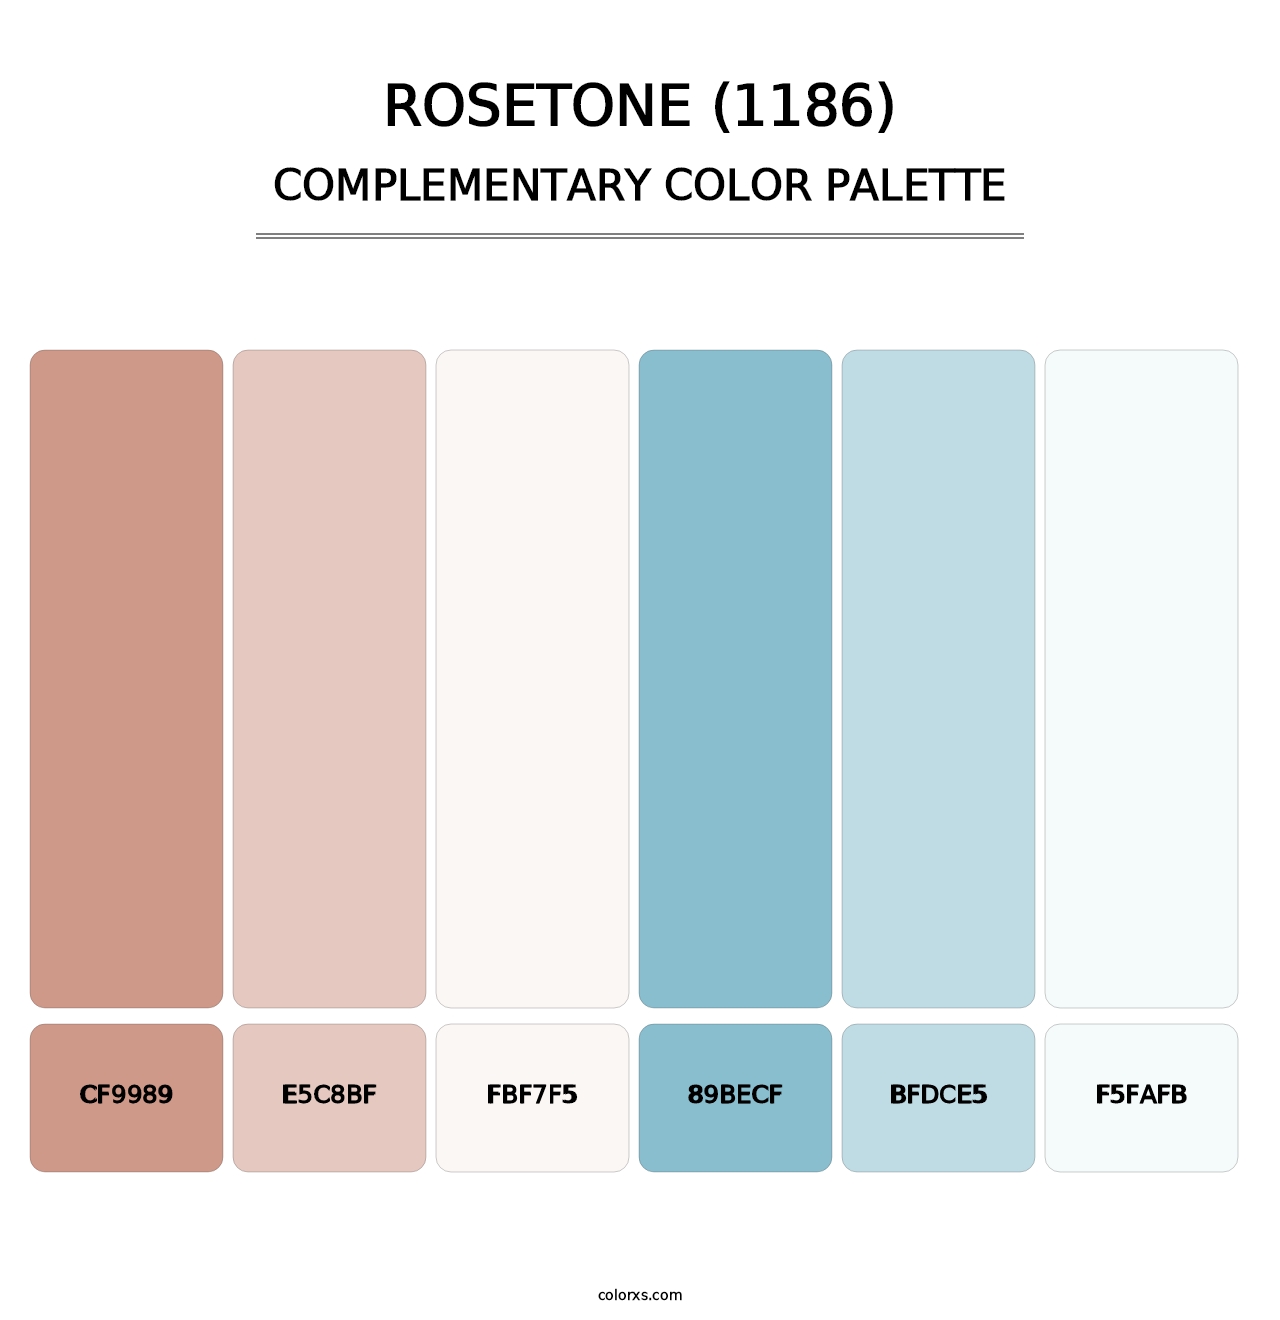 Rosetone (1186) - Complementary Color Palette